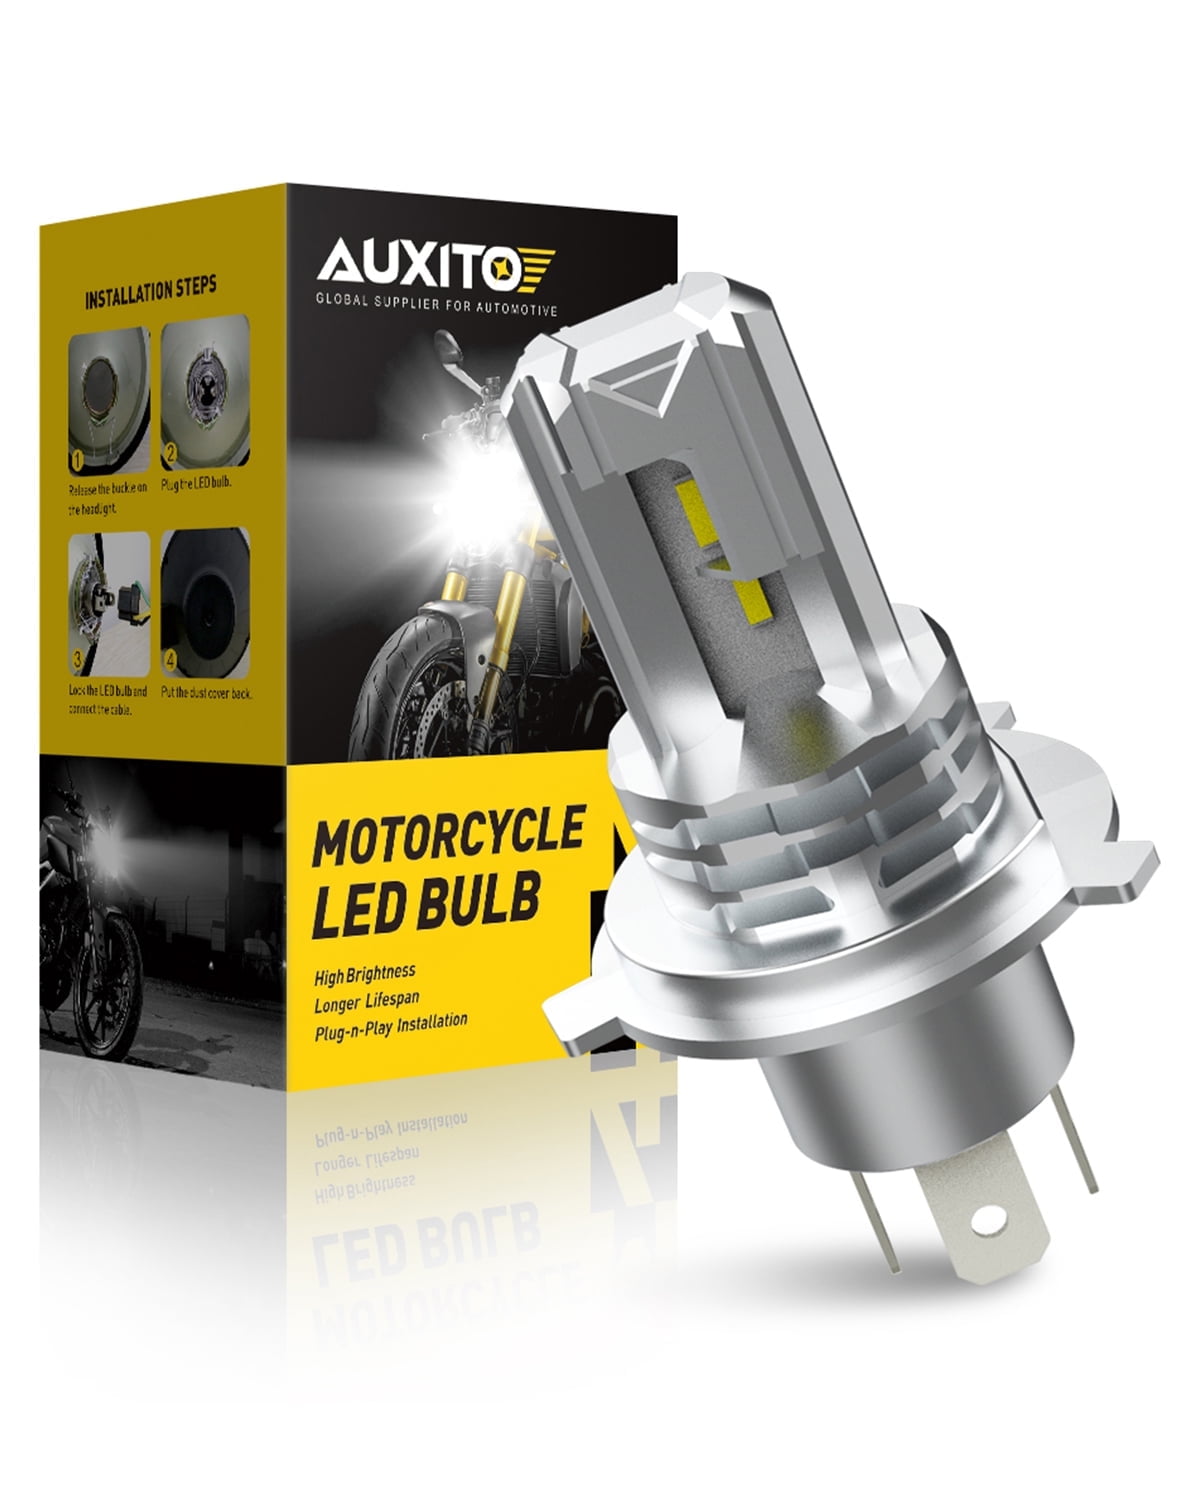 AUXITO H4 LED Headlight Bulb Motorcycle, 9003 HB2 LED Light 6000K White for  High and Low Hi/Lo Beam 1860 CSP LED Chips, Pack of 1